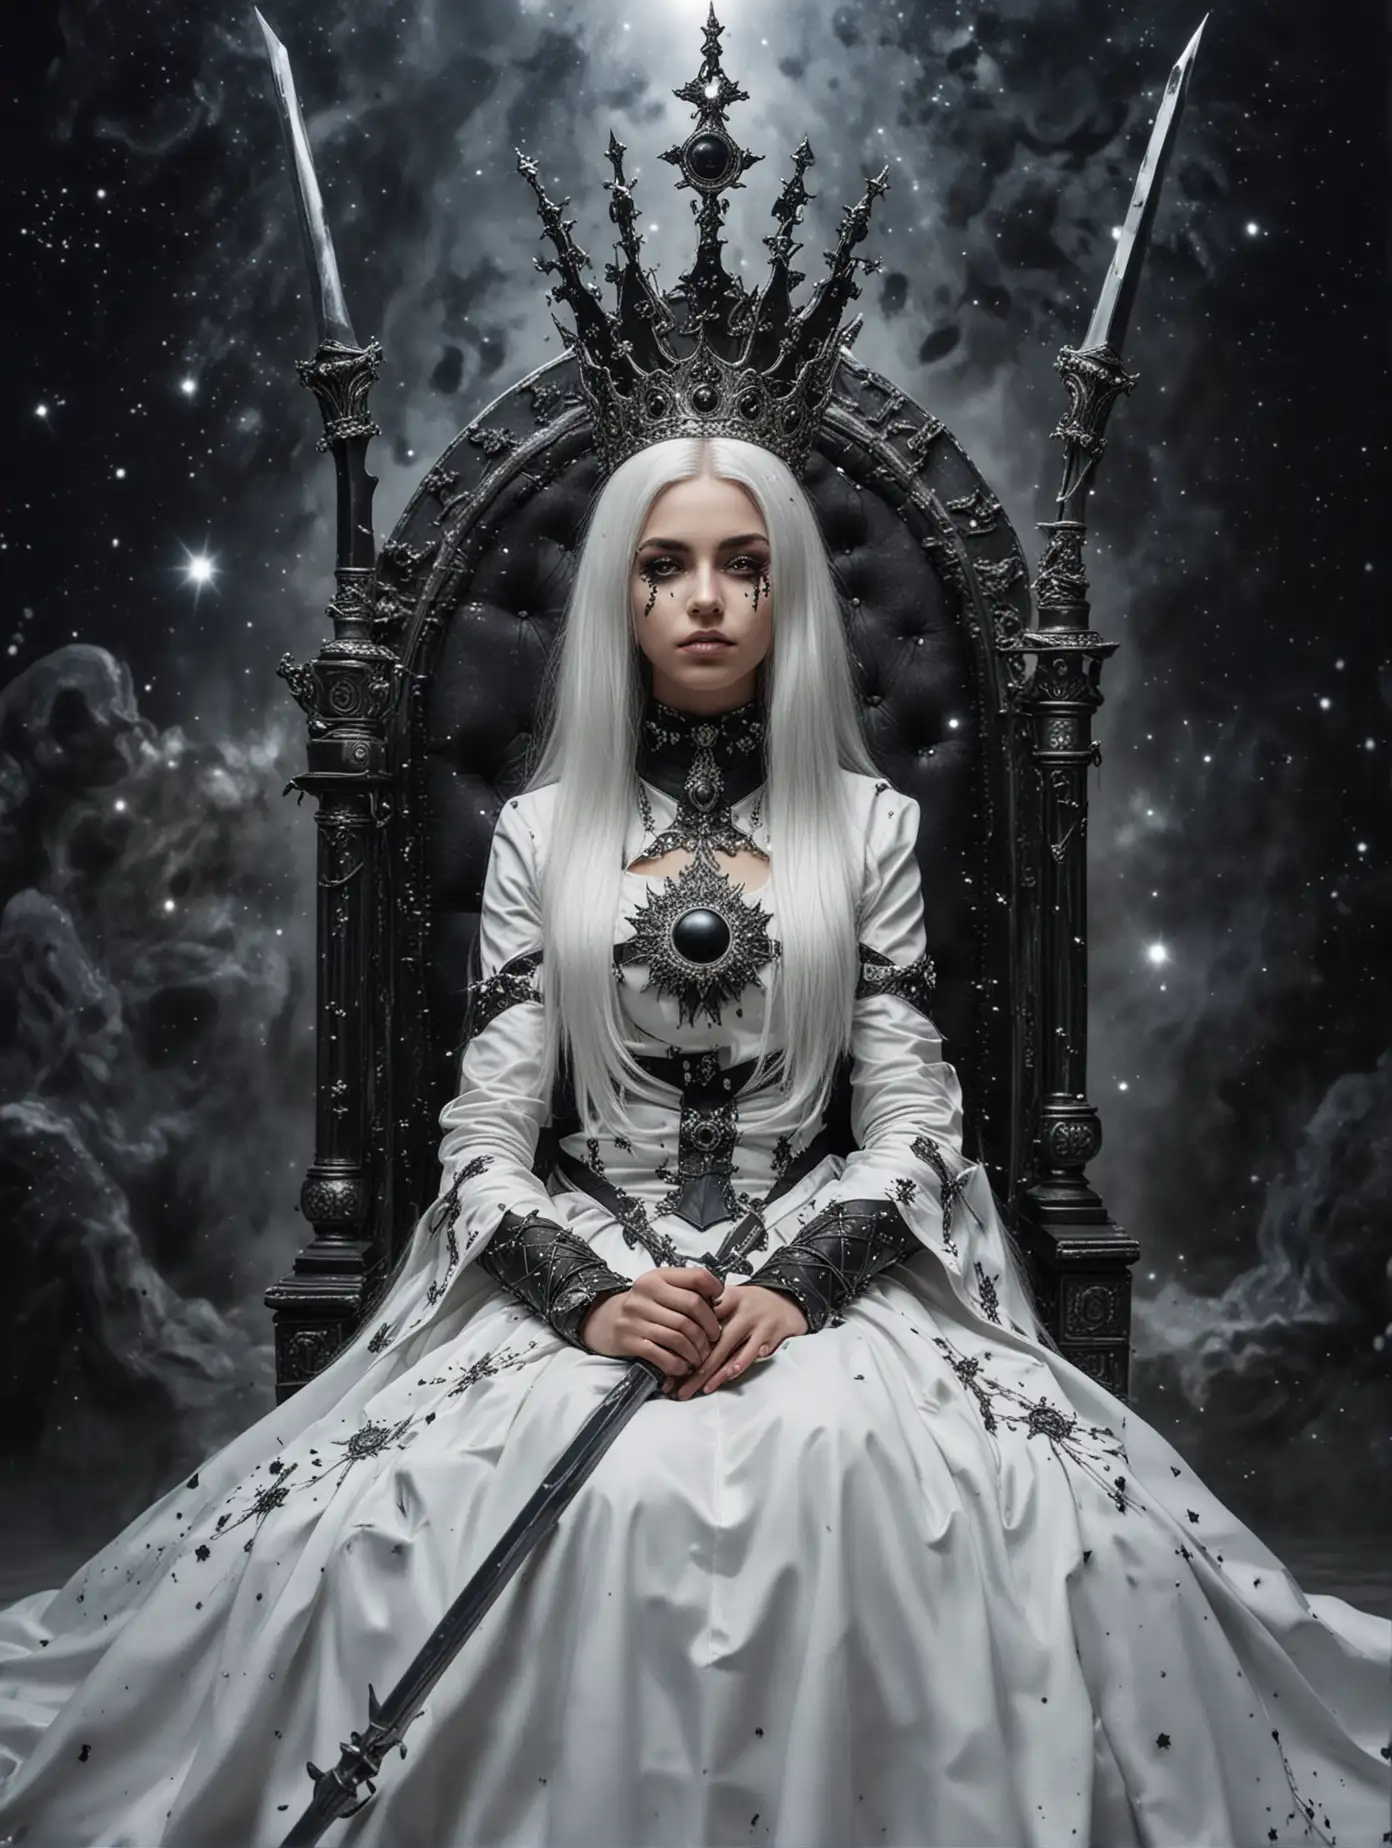 Beautiful-Sister-Hetsemit-Reigns-Amidst-Cosmic-Majesty-with-Silver-Crown-and-Black-Sword